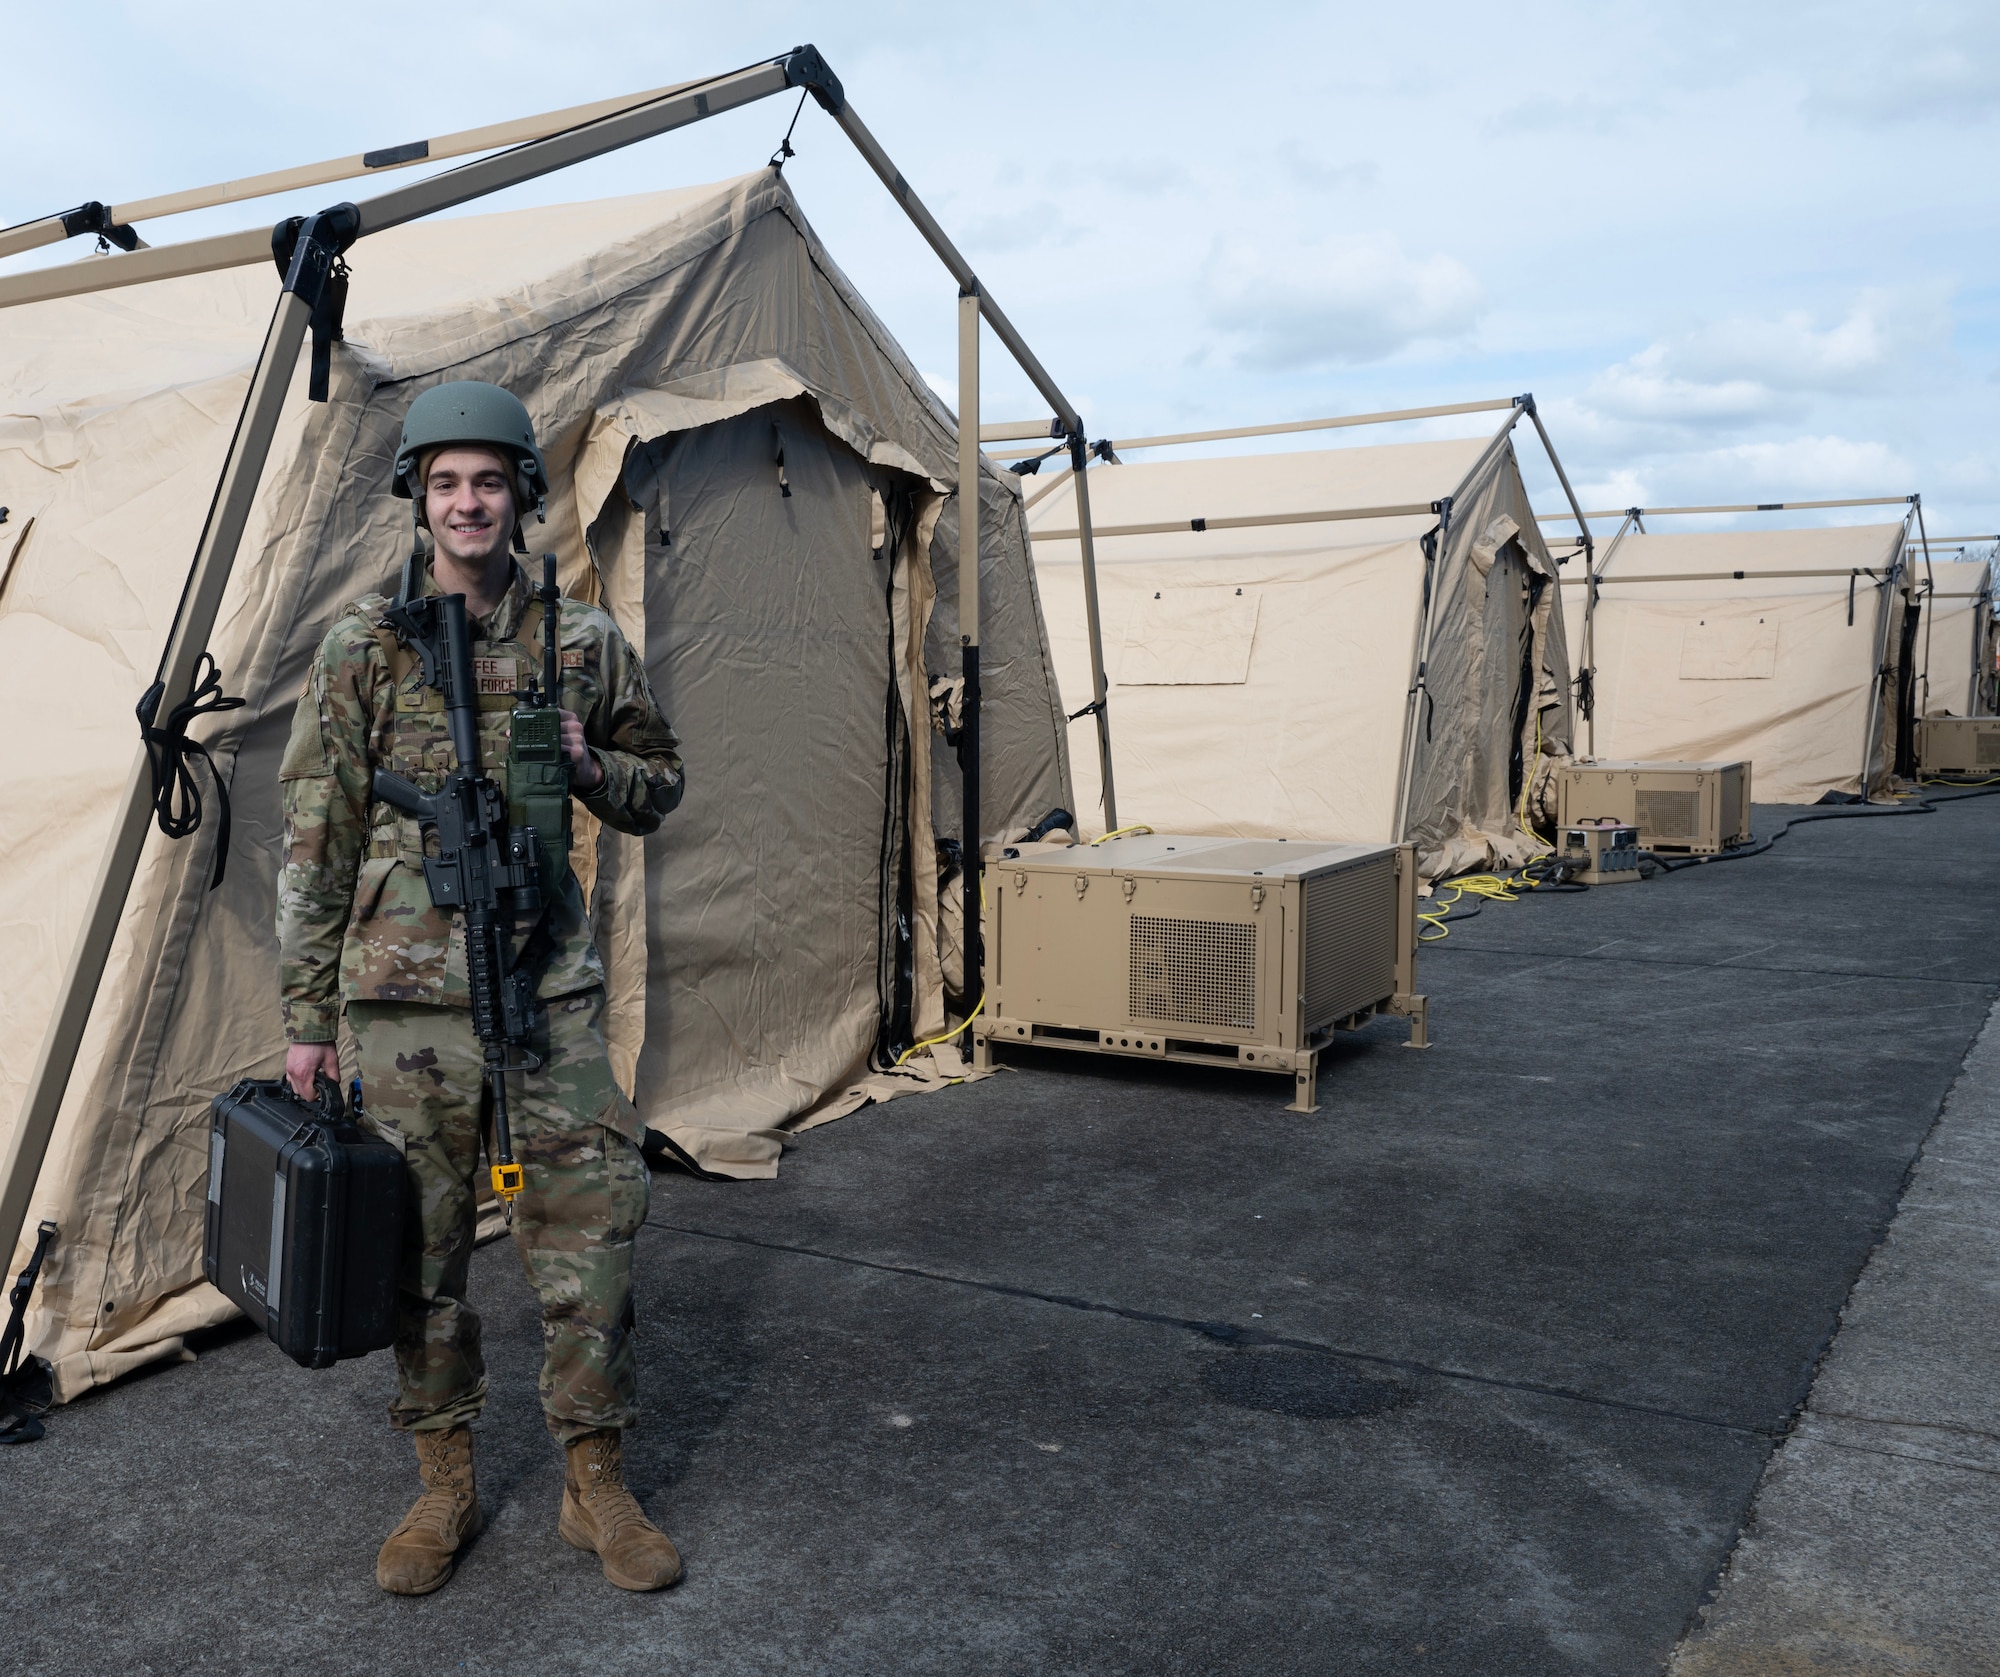 U.S. Air Force 1st Lt. Tyler Fefee, 435th Contingency Response Squadron bare base flight commander, is responsible for safe living conditions for all members, along with operational infrastructure during Exercise Agile Bison at Chièvres Air Base, Belgium, March 11, 2023.